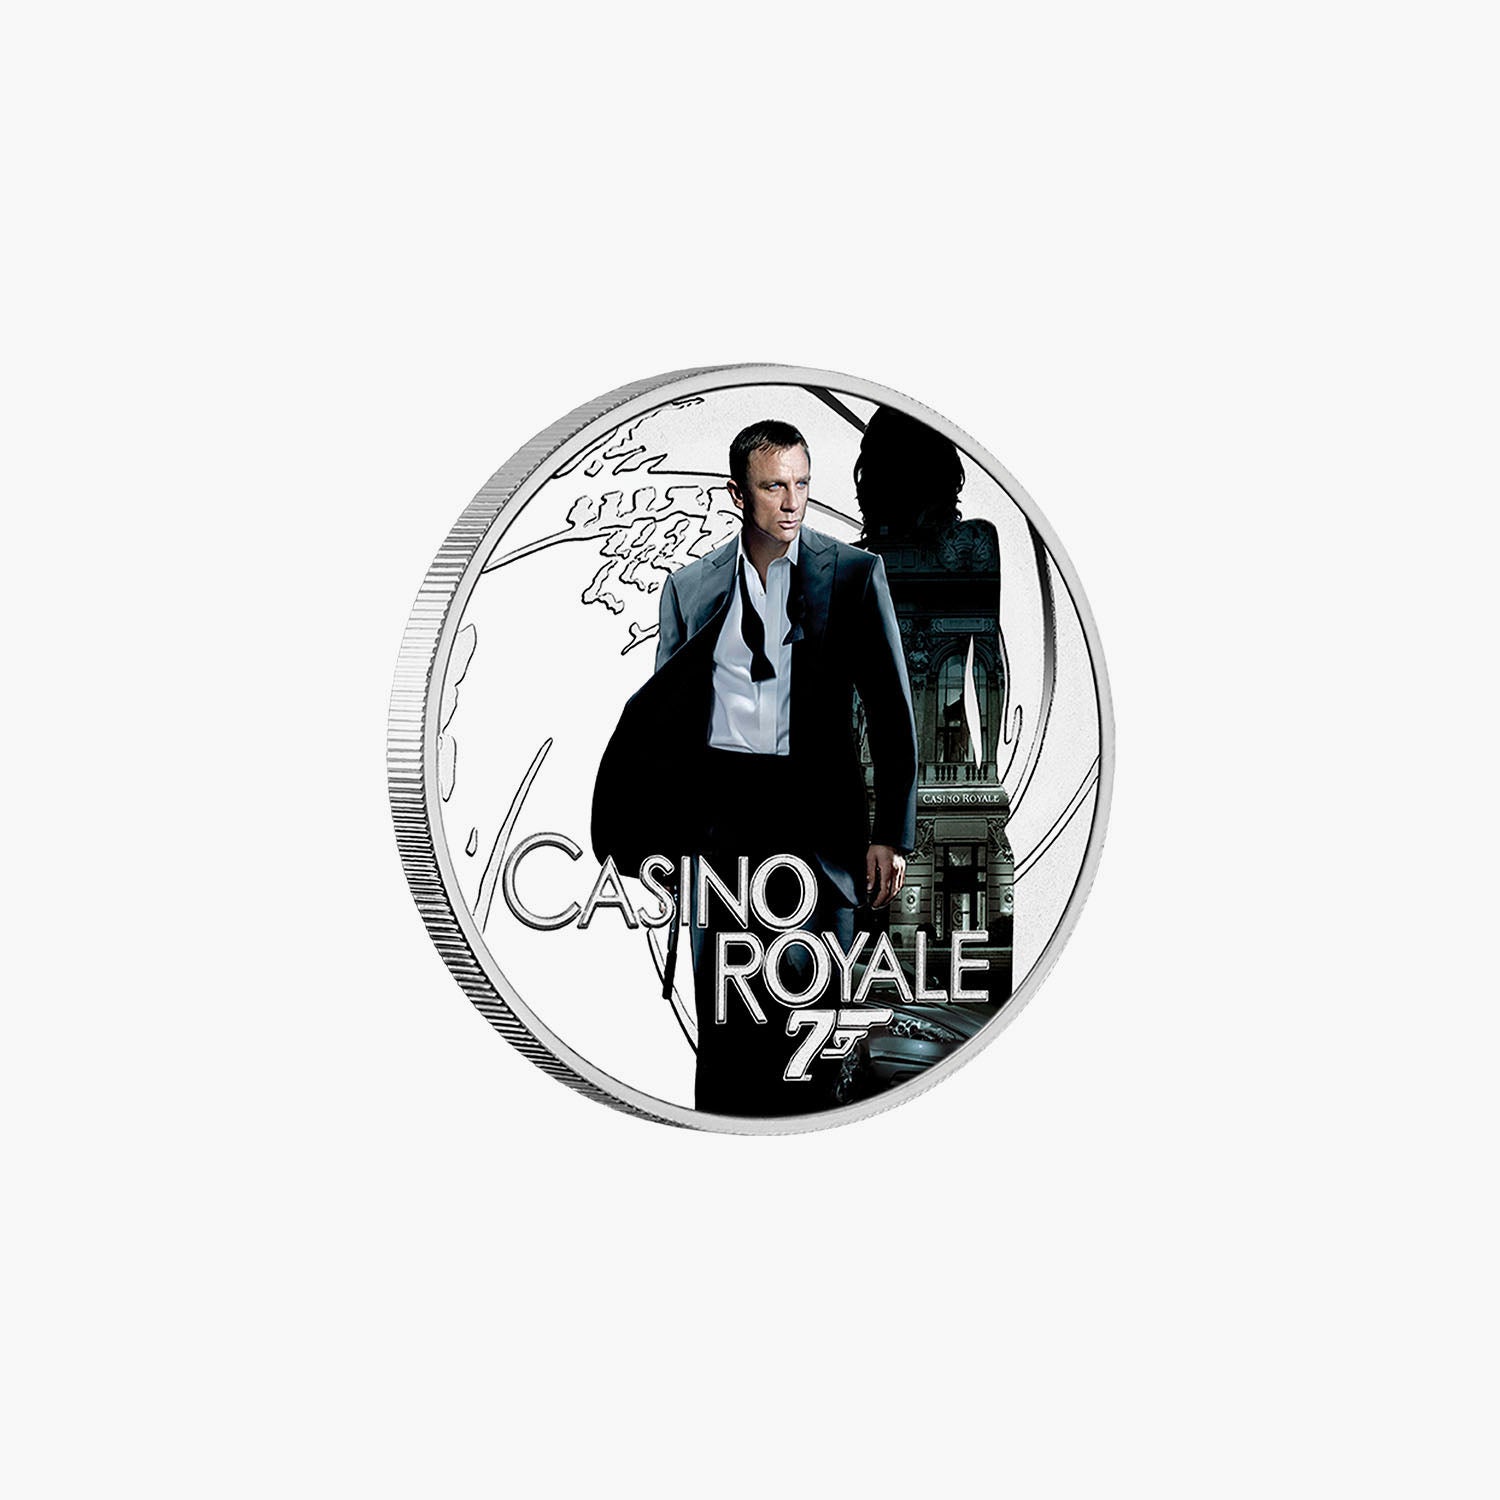 James Bond - Casino Royale Solid Silver Movie Coin